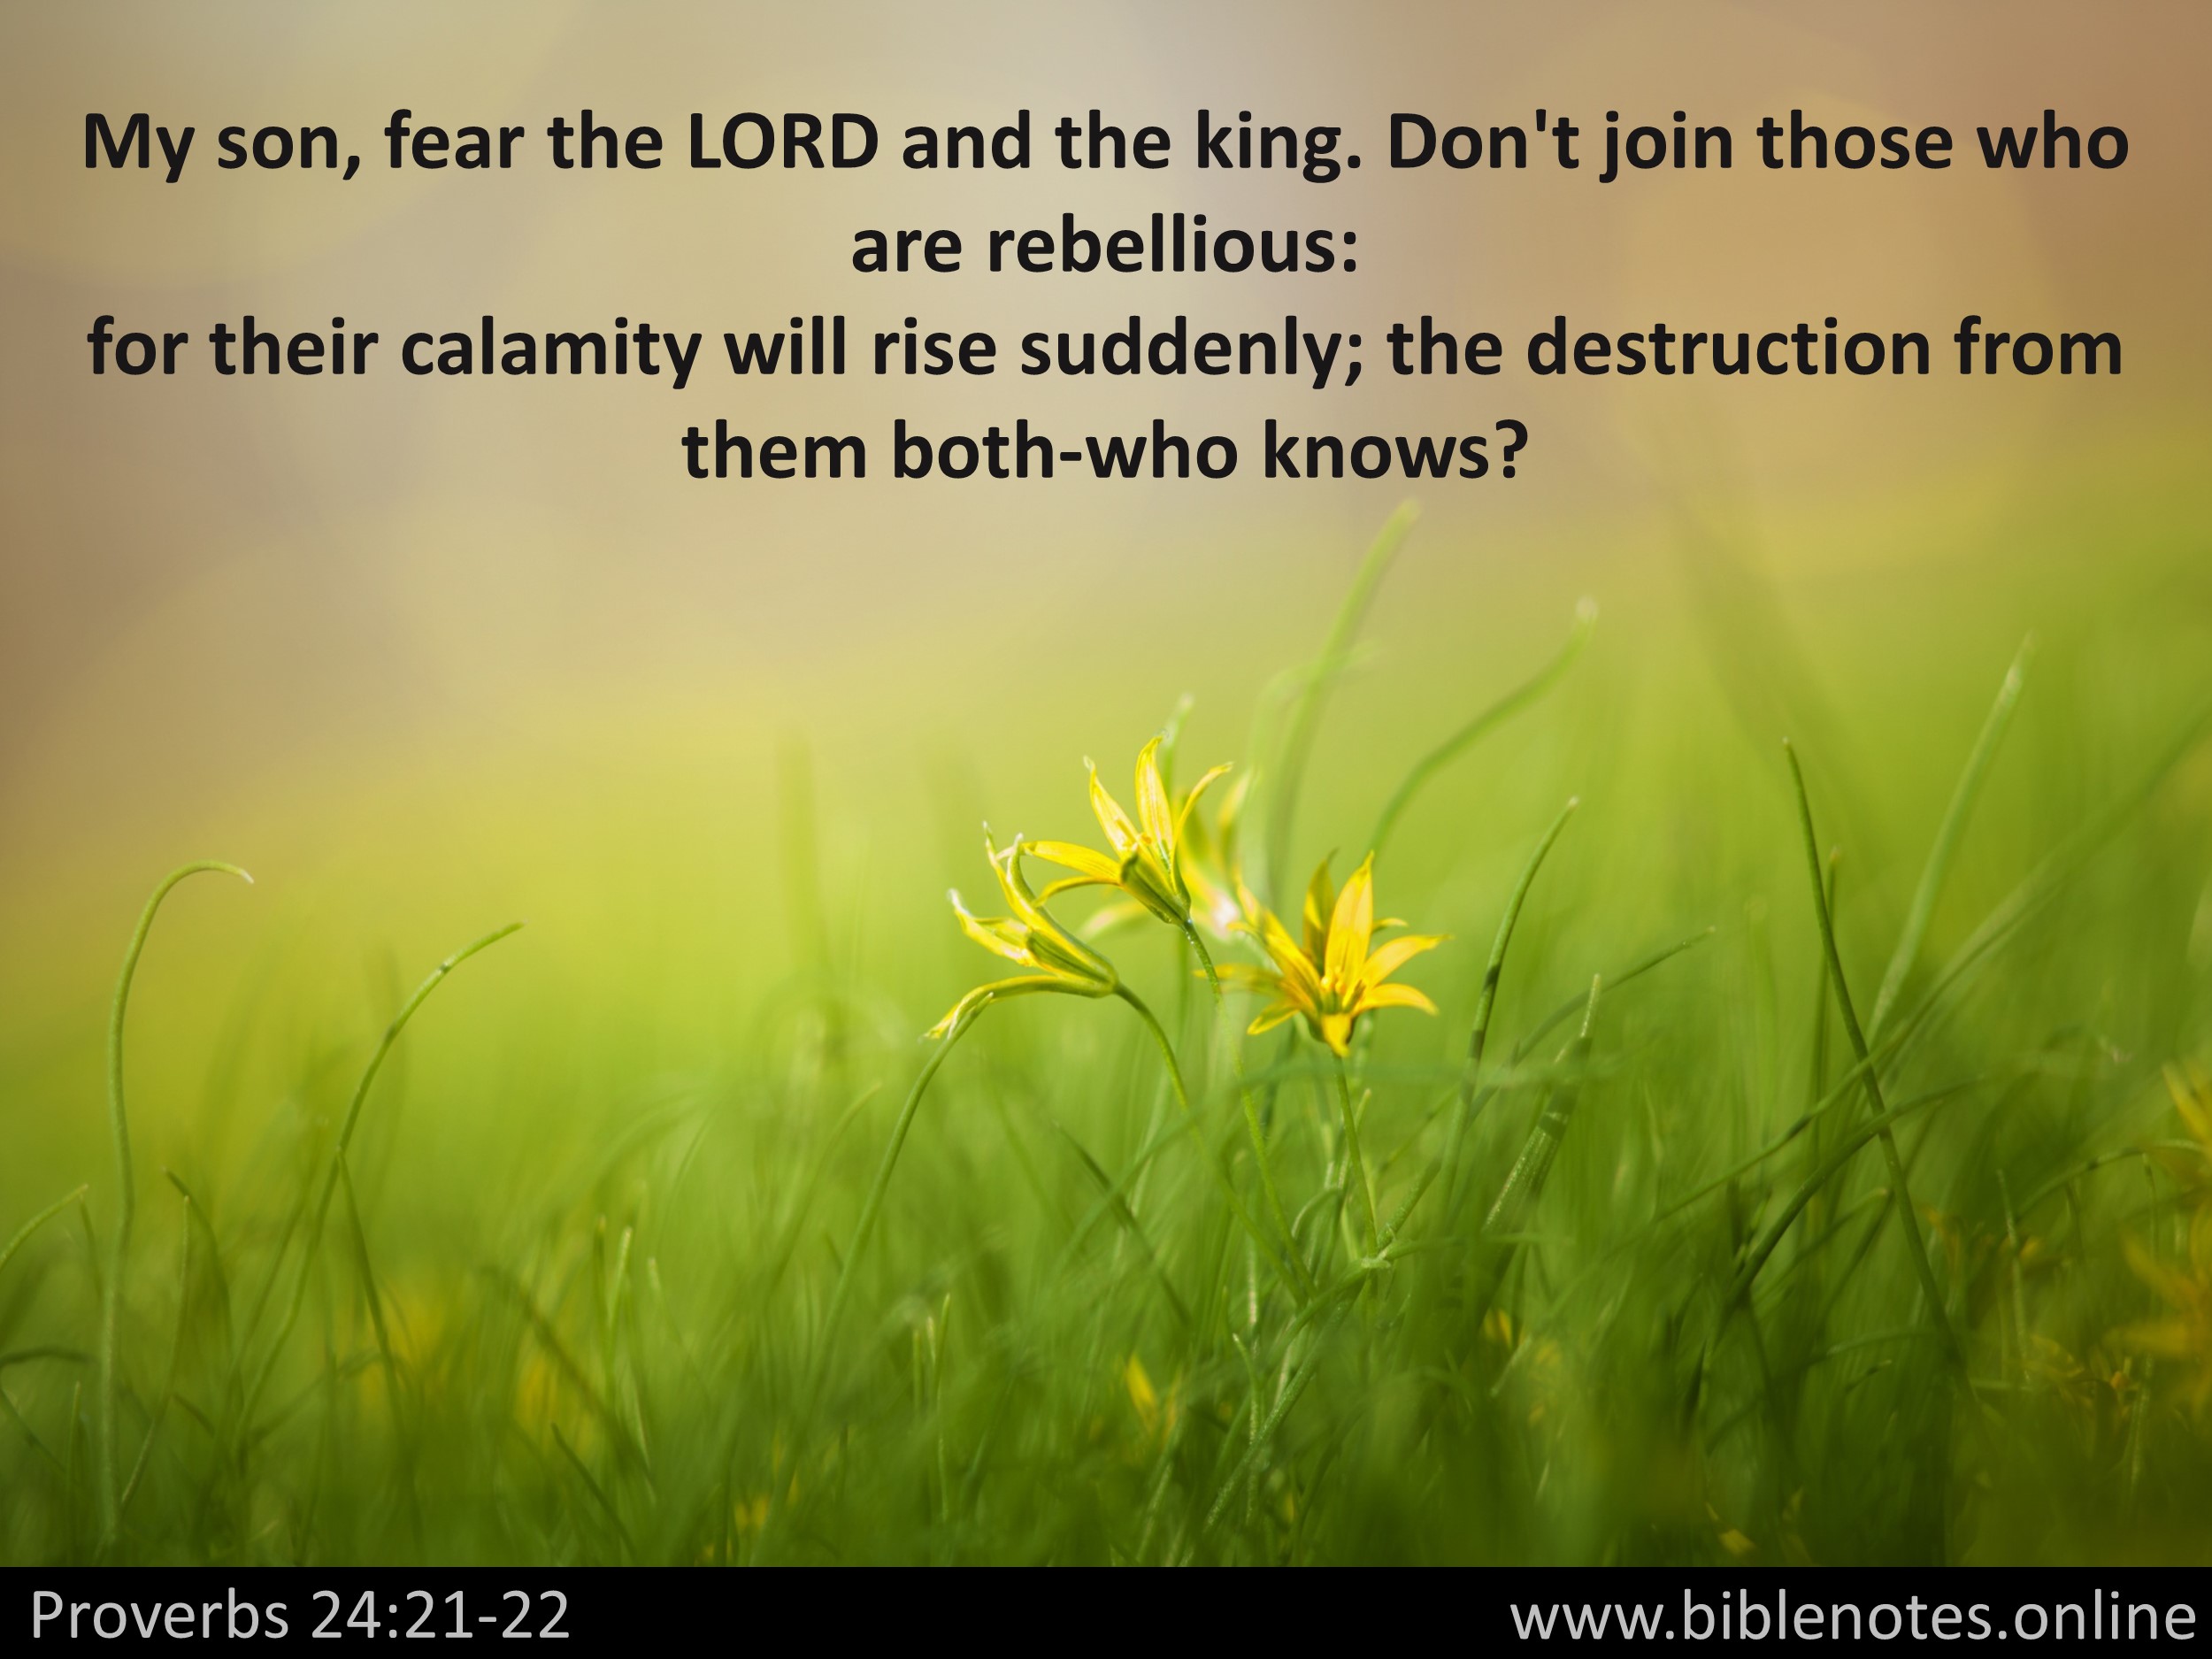 Bible Verse from Proverbs Chapter 24